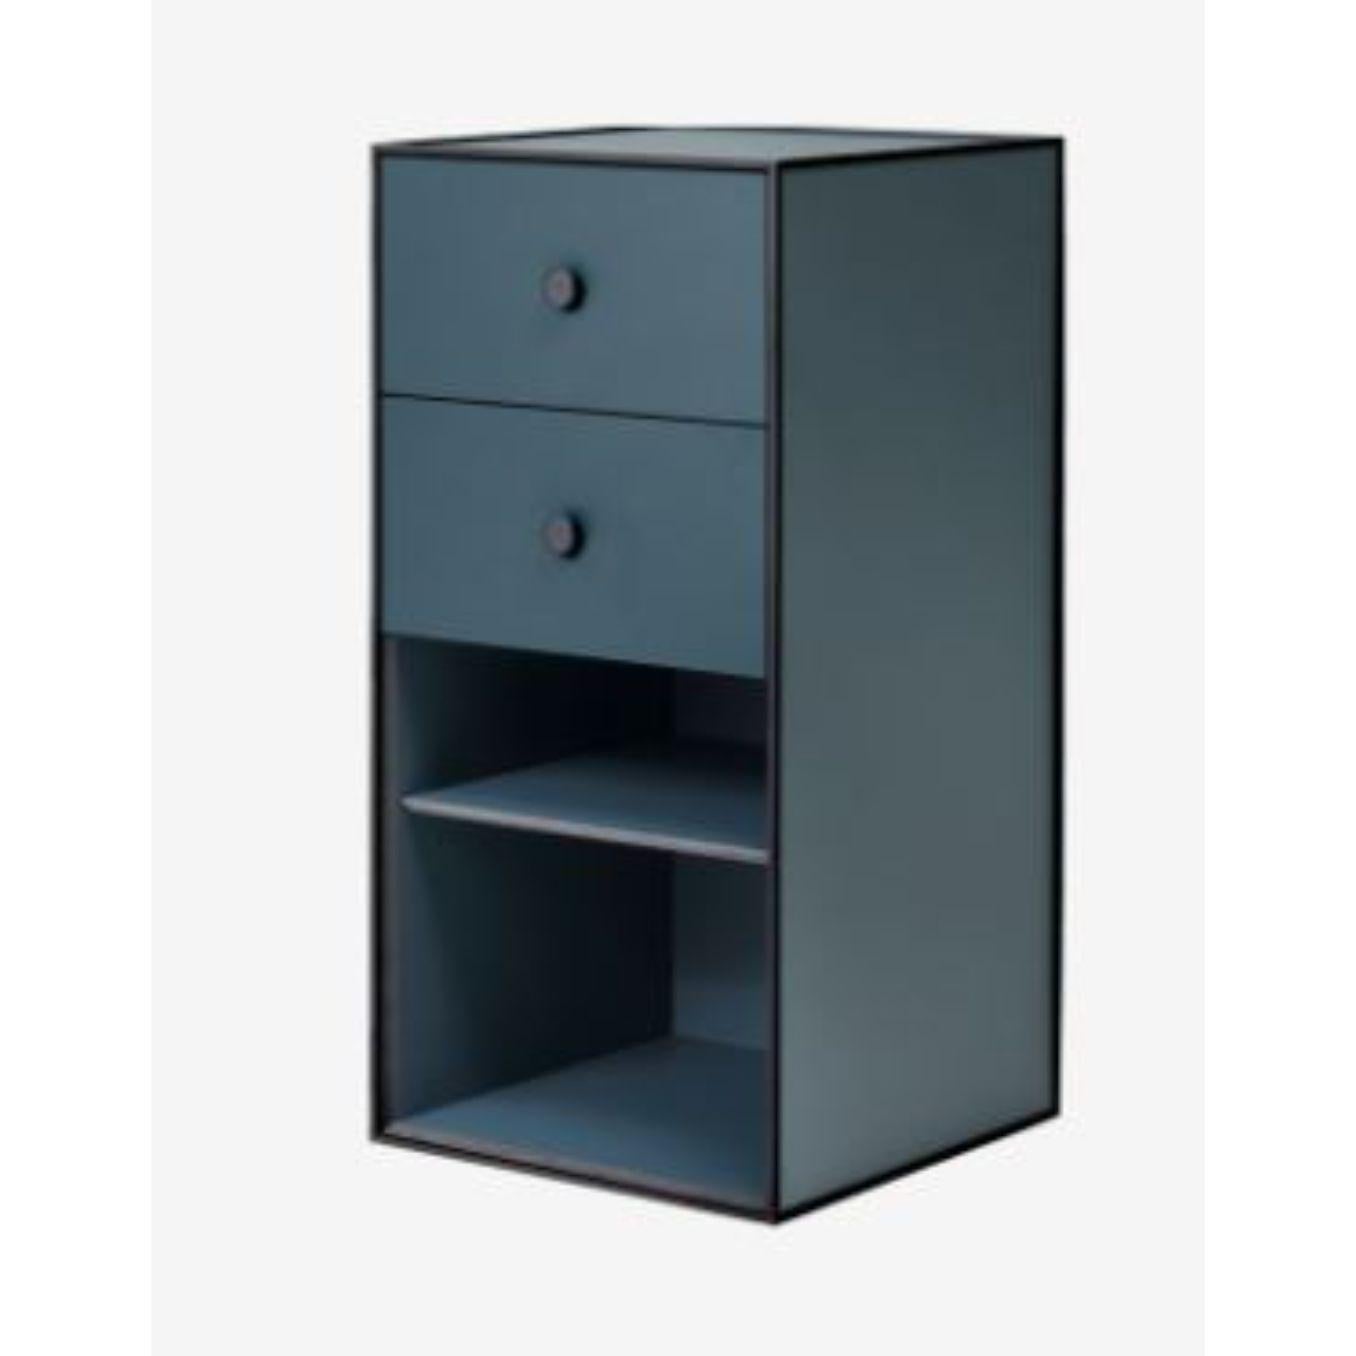 70 Fjord frame box with shelf / 2 drawers by Lassen
Dimensions: D 35 x W 35 x H 70 cm 
Materials: Finér, Melamin, Melamin, Melamine, Metal, Veneer
Also available in different colors and dimensions. 
Weight: 13 Kg


By Lassen is a Danish